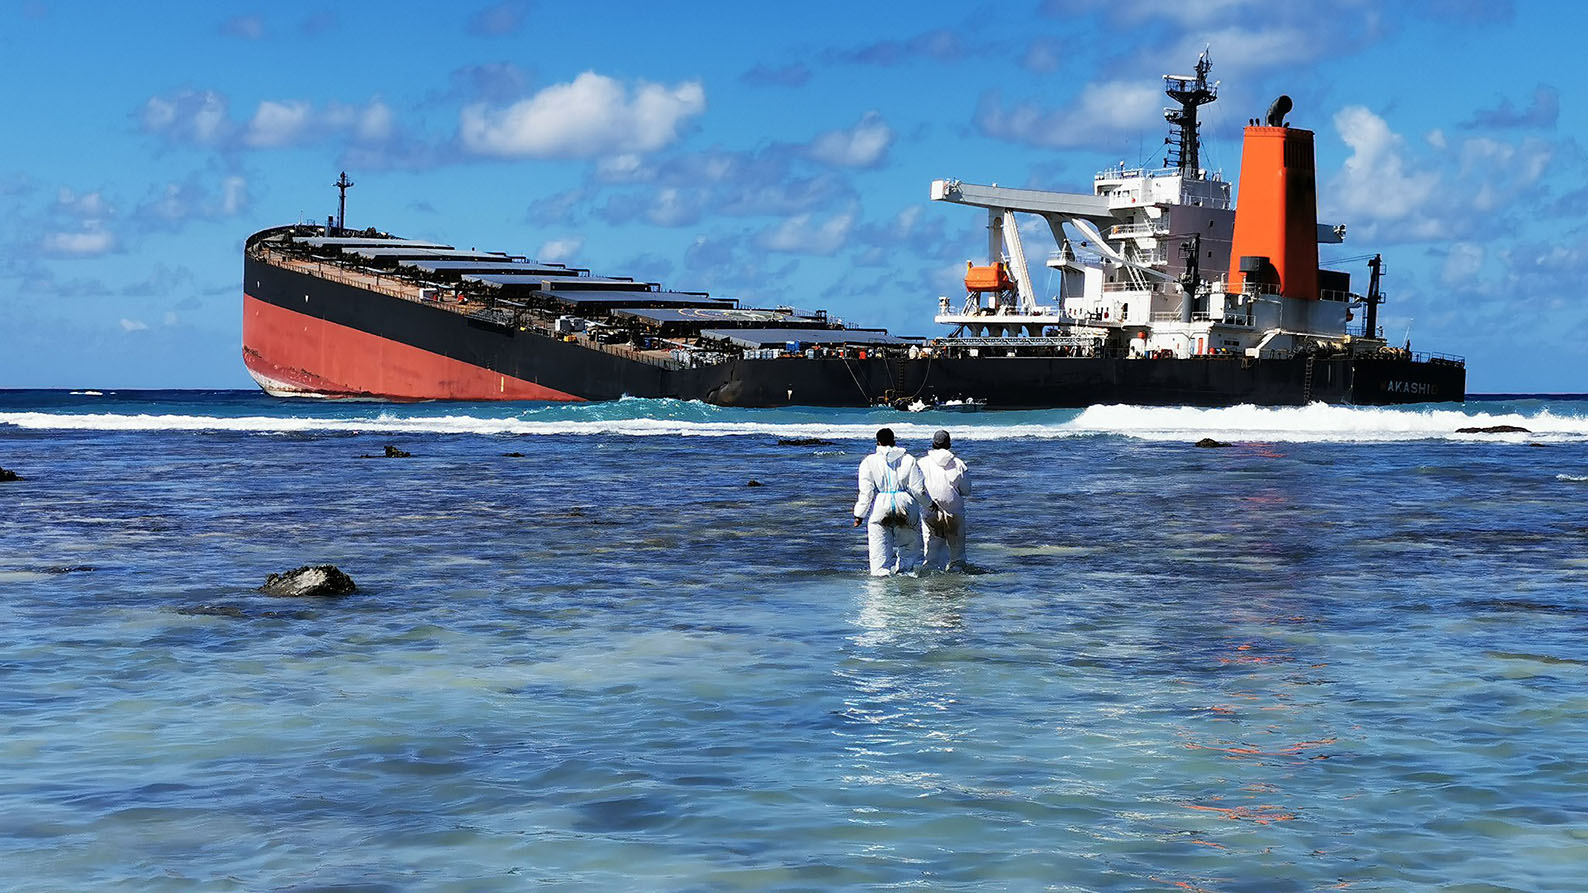 Image for Mauritius incident was world’s first major spill of Very Low Sulfur Fuel Oil